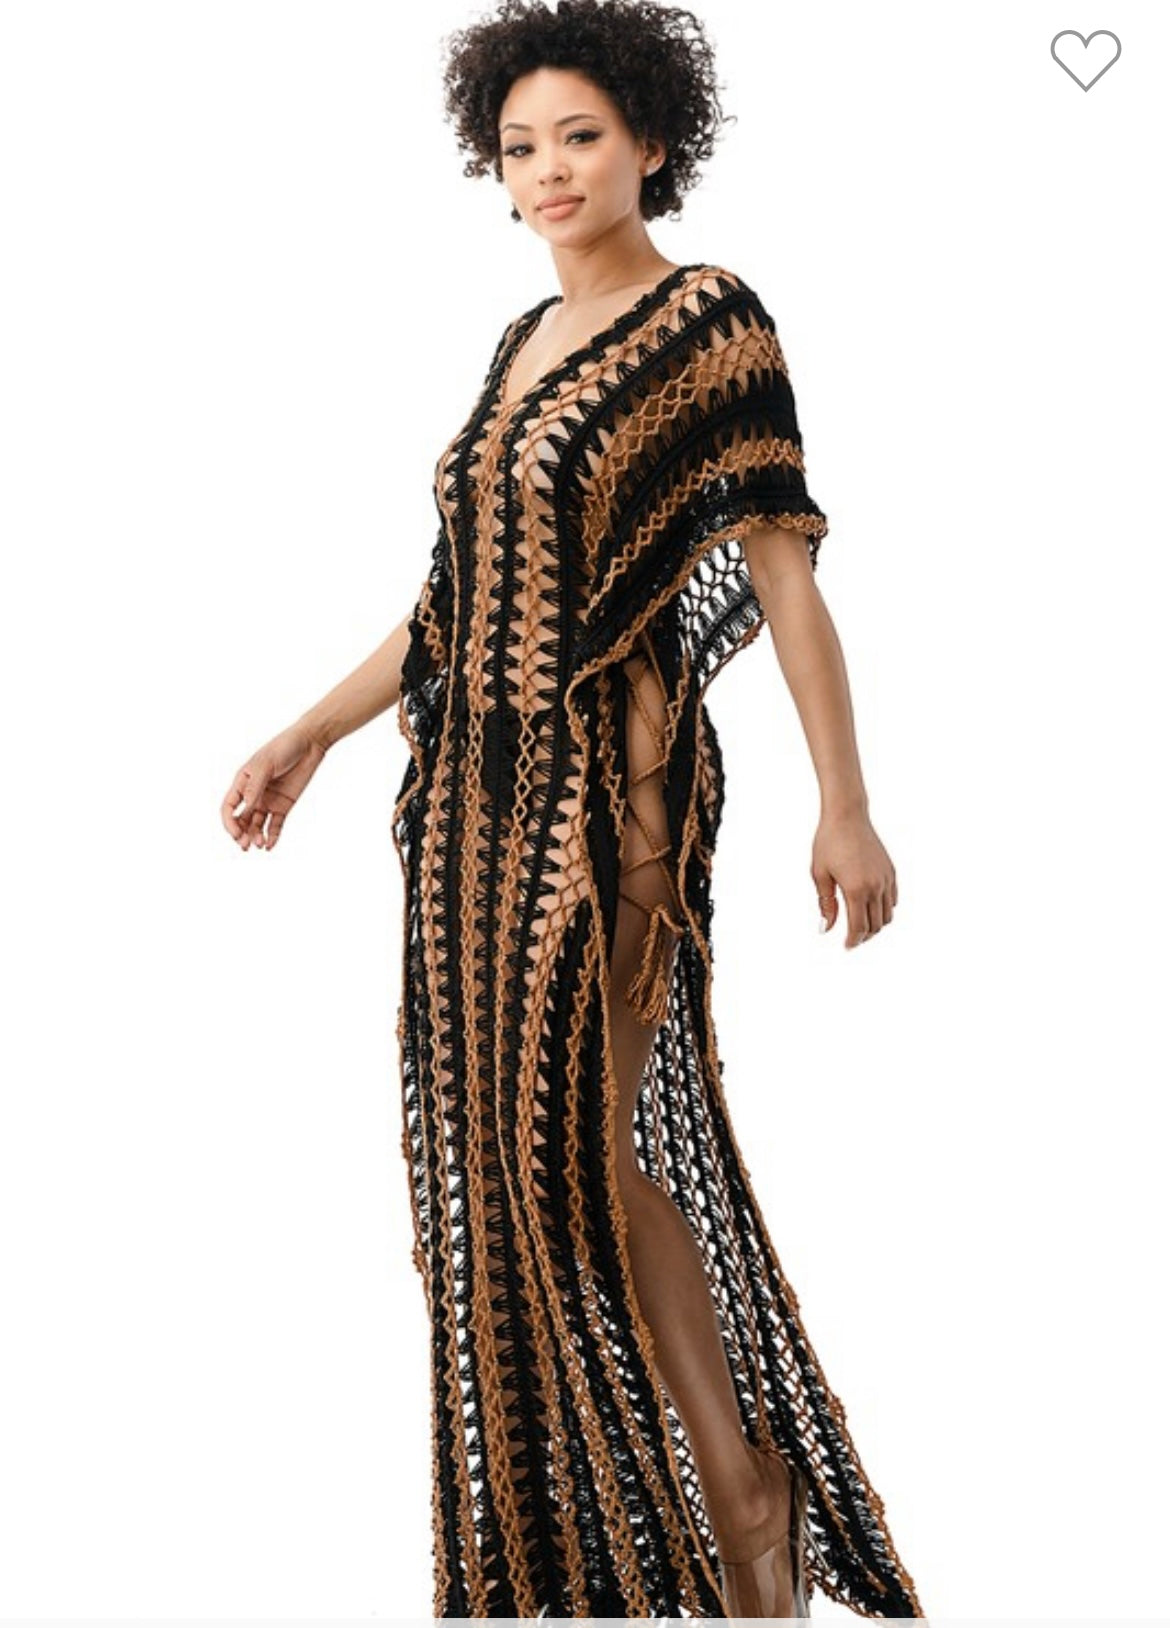 Paradise Island 🏝 Crochet Cover Up (Black/Brown)